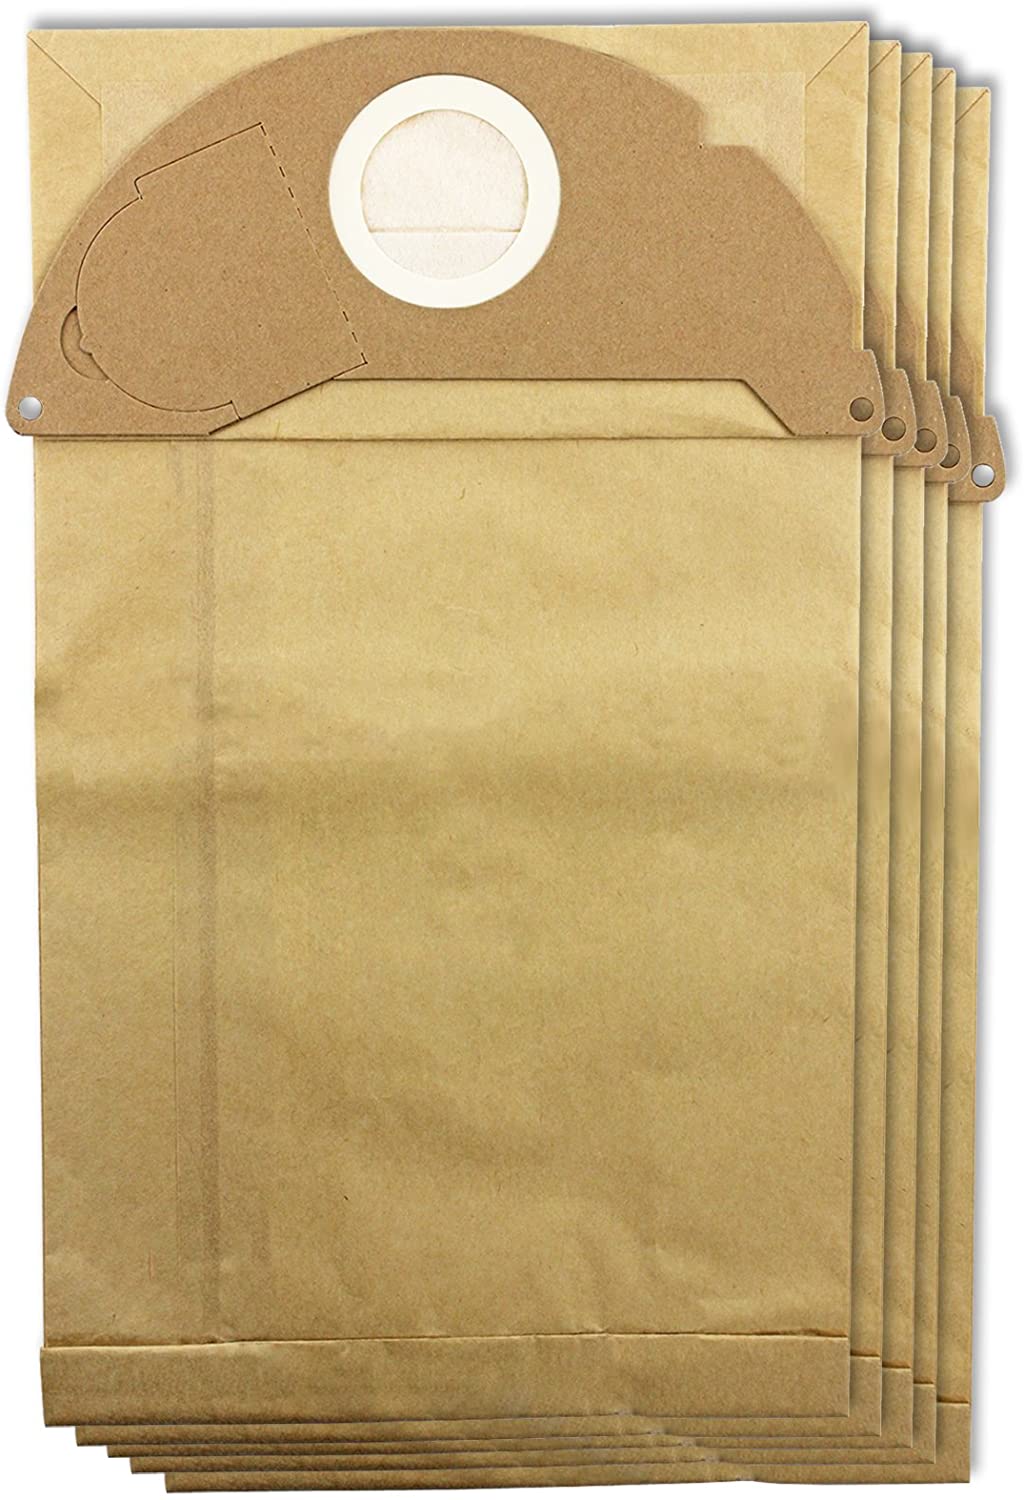 Strong Dust Bags for Karcher WD2200 WD2240 Vacuum Cleaners (Pack of 5 + Fresheners)